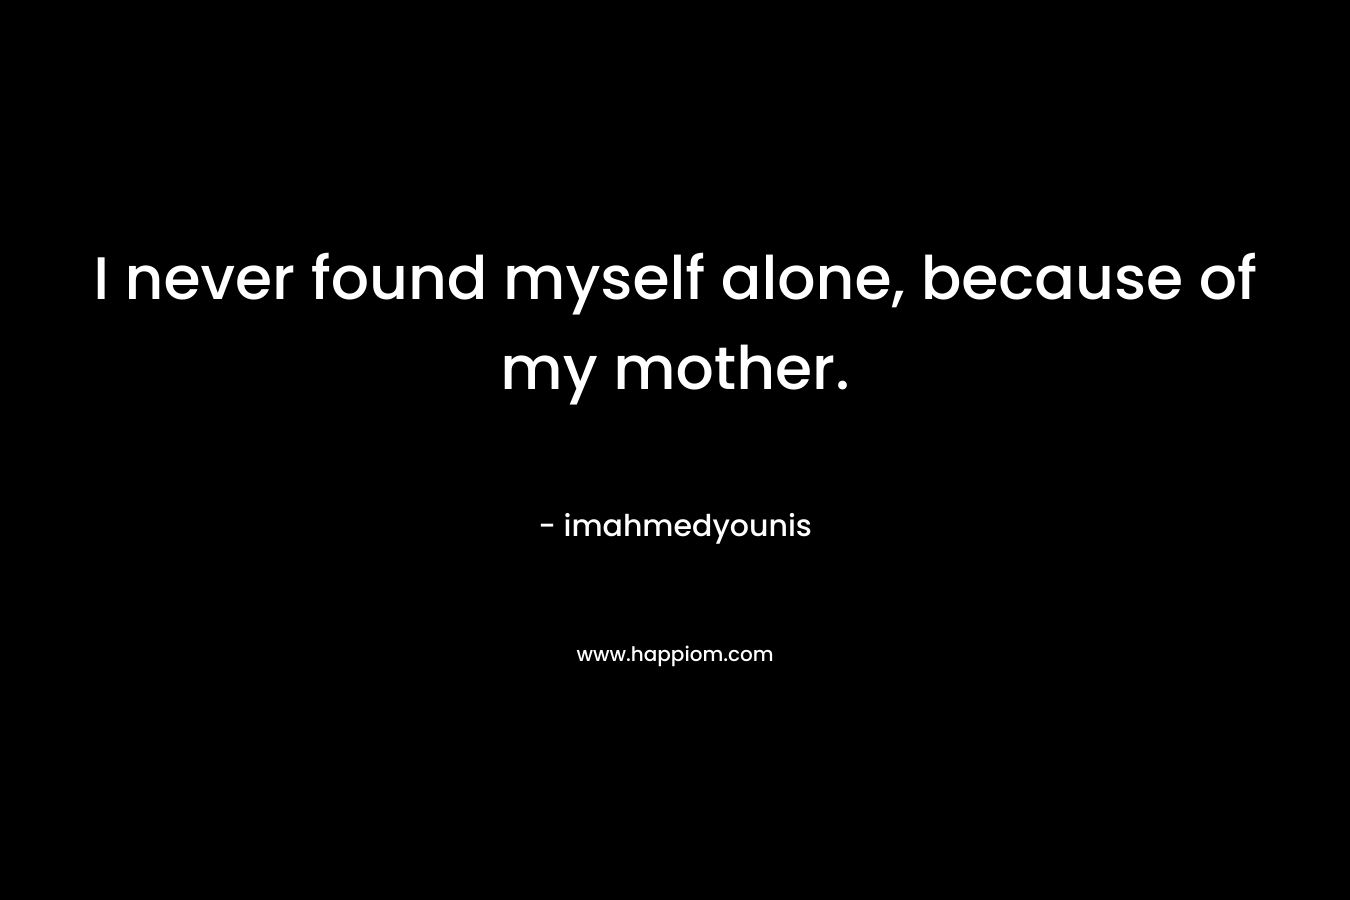 I never found myself alone, because of my mother. – imahmedyounis